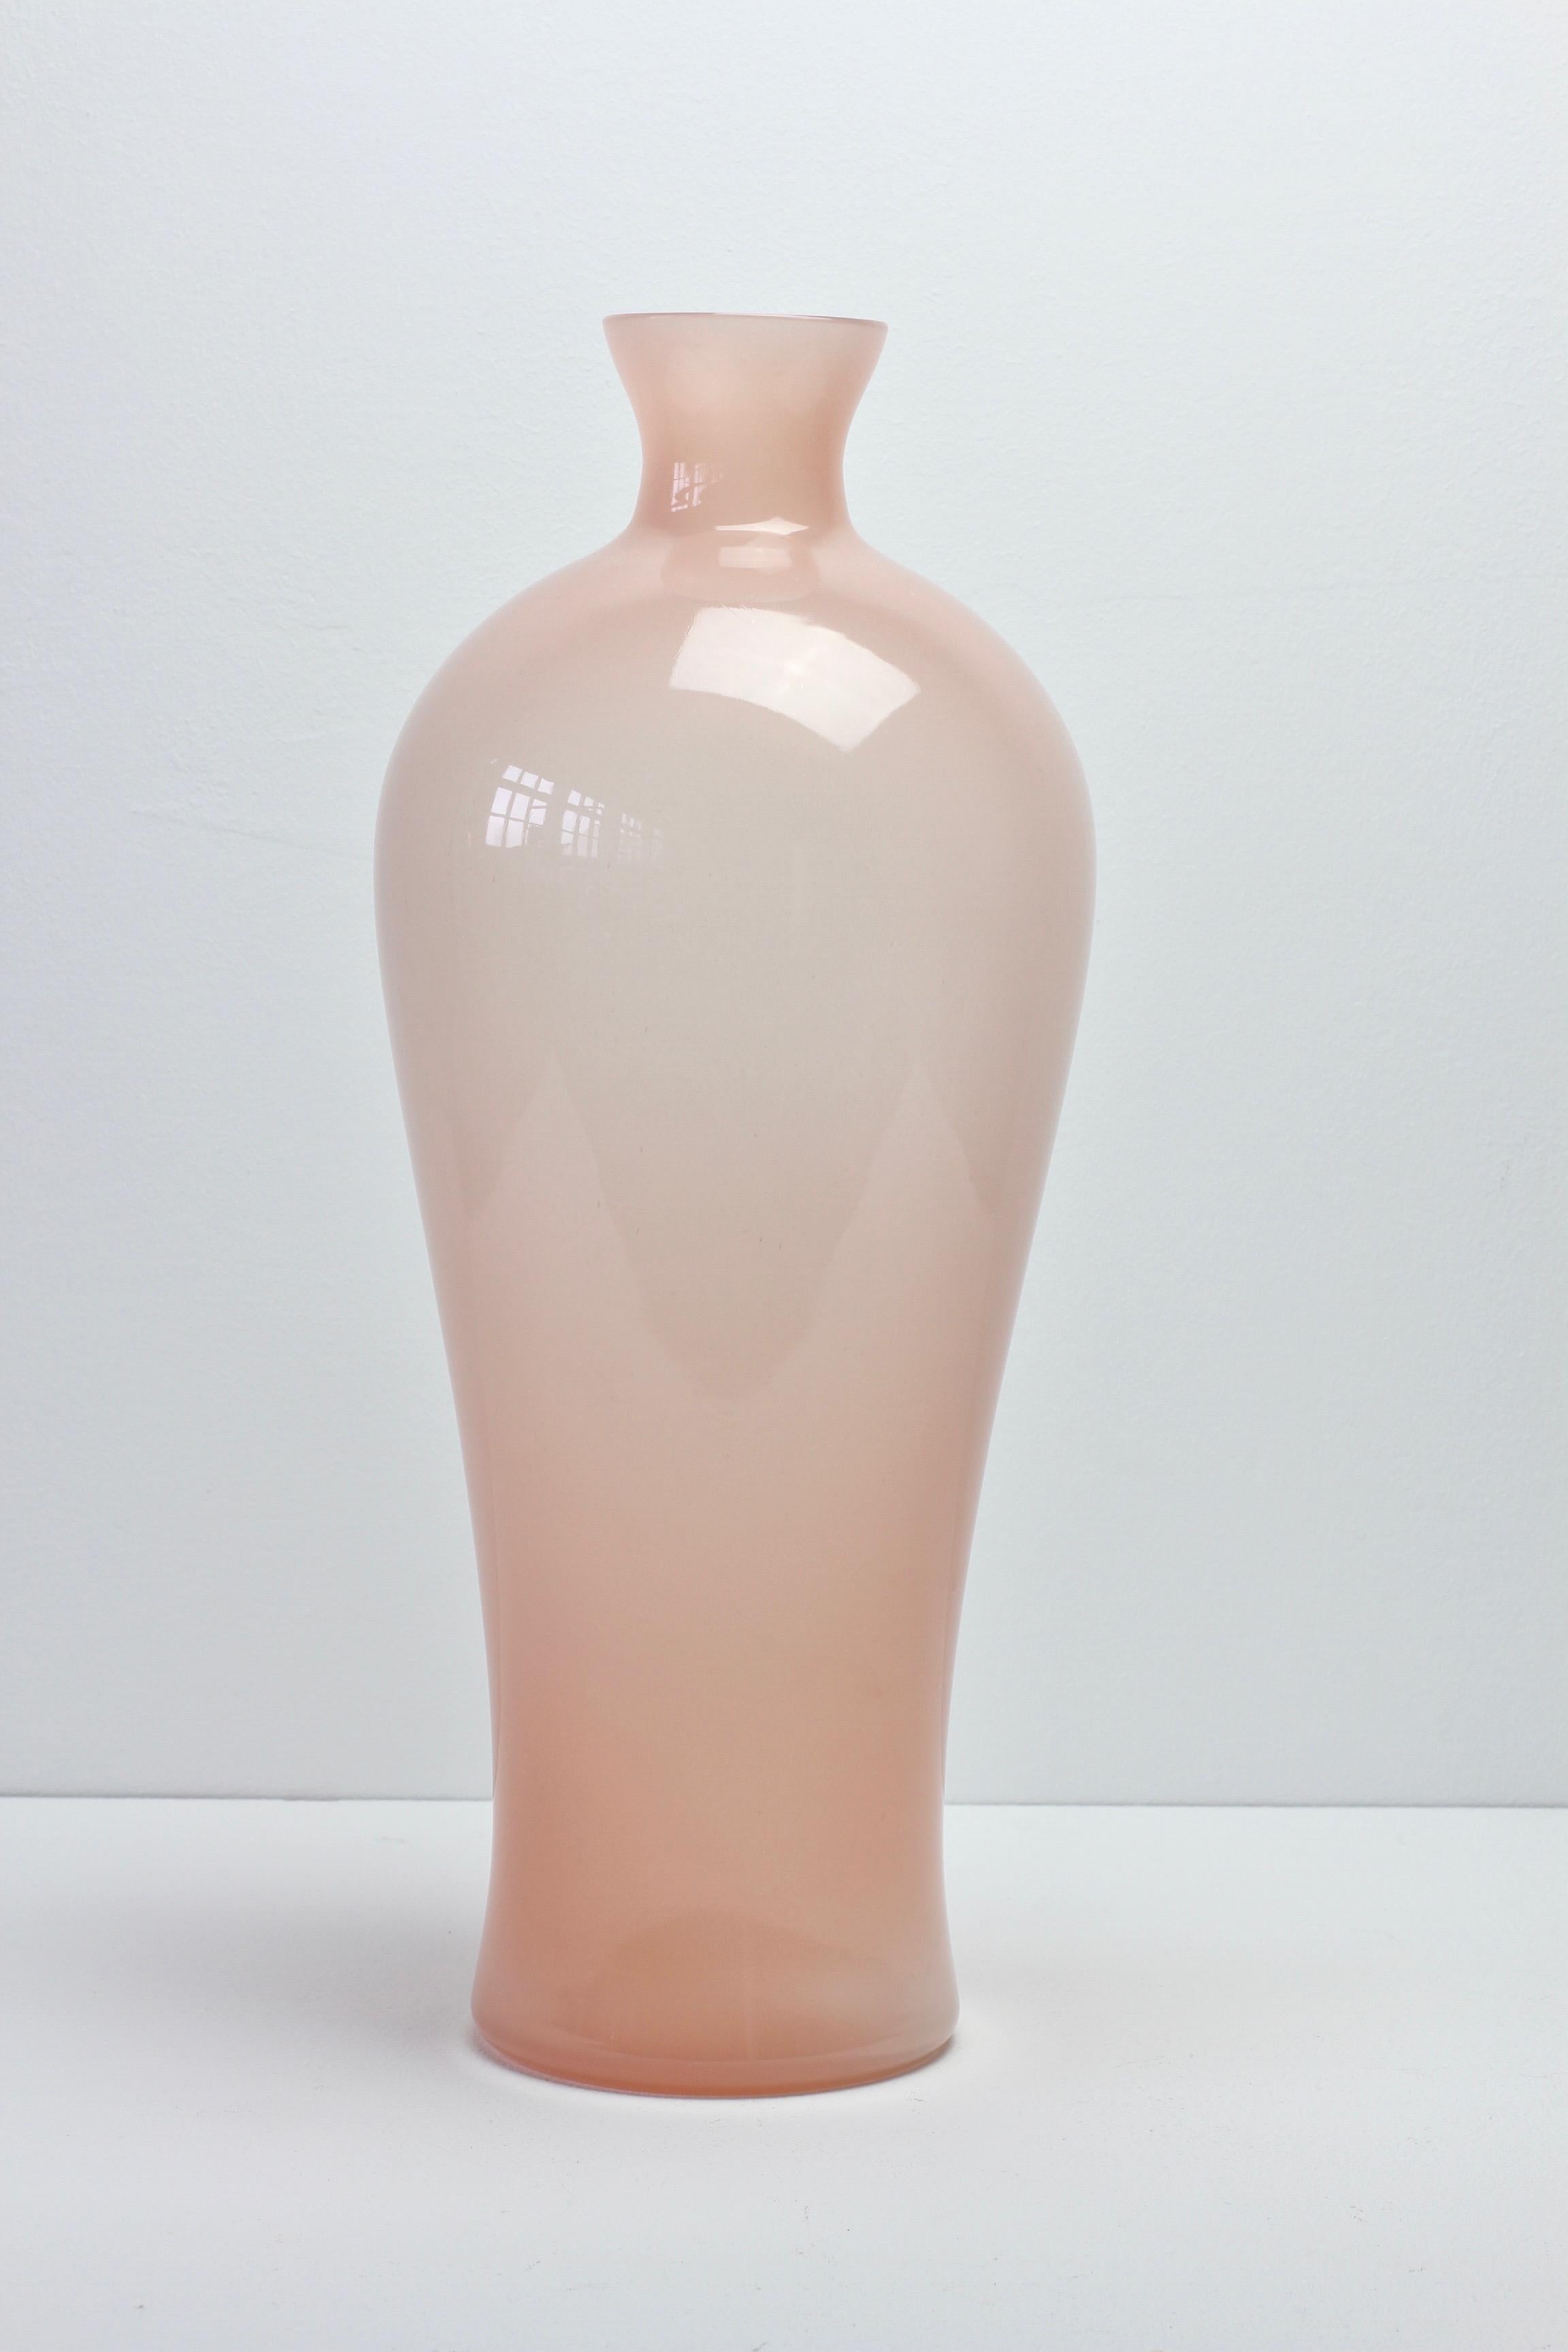 Tall, large vintage midcentury centre vase by Cenedese Vetri of Murano, Italy. Particularly striking is it's elegant form an pink color/colour. A rare vessel - especially in this size.

Dimensions are: 41.3cms tall, 16.5cm at widest point and 12cm